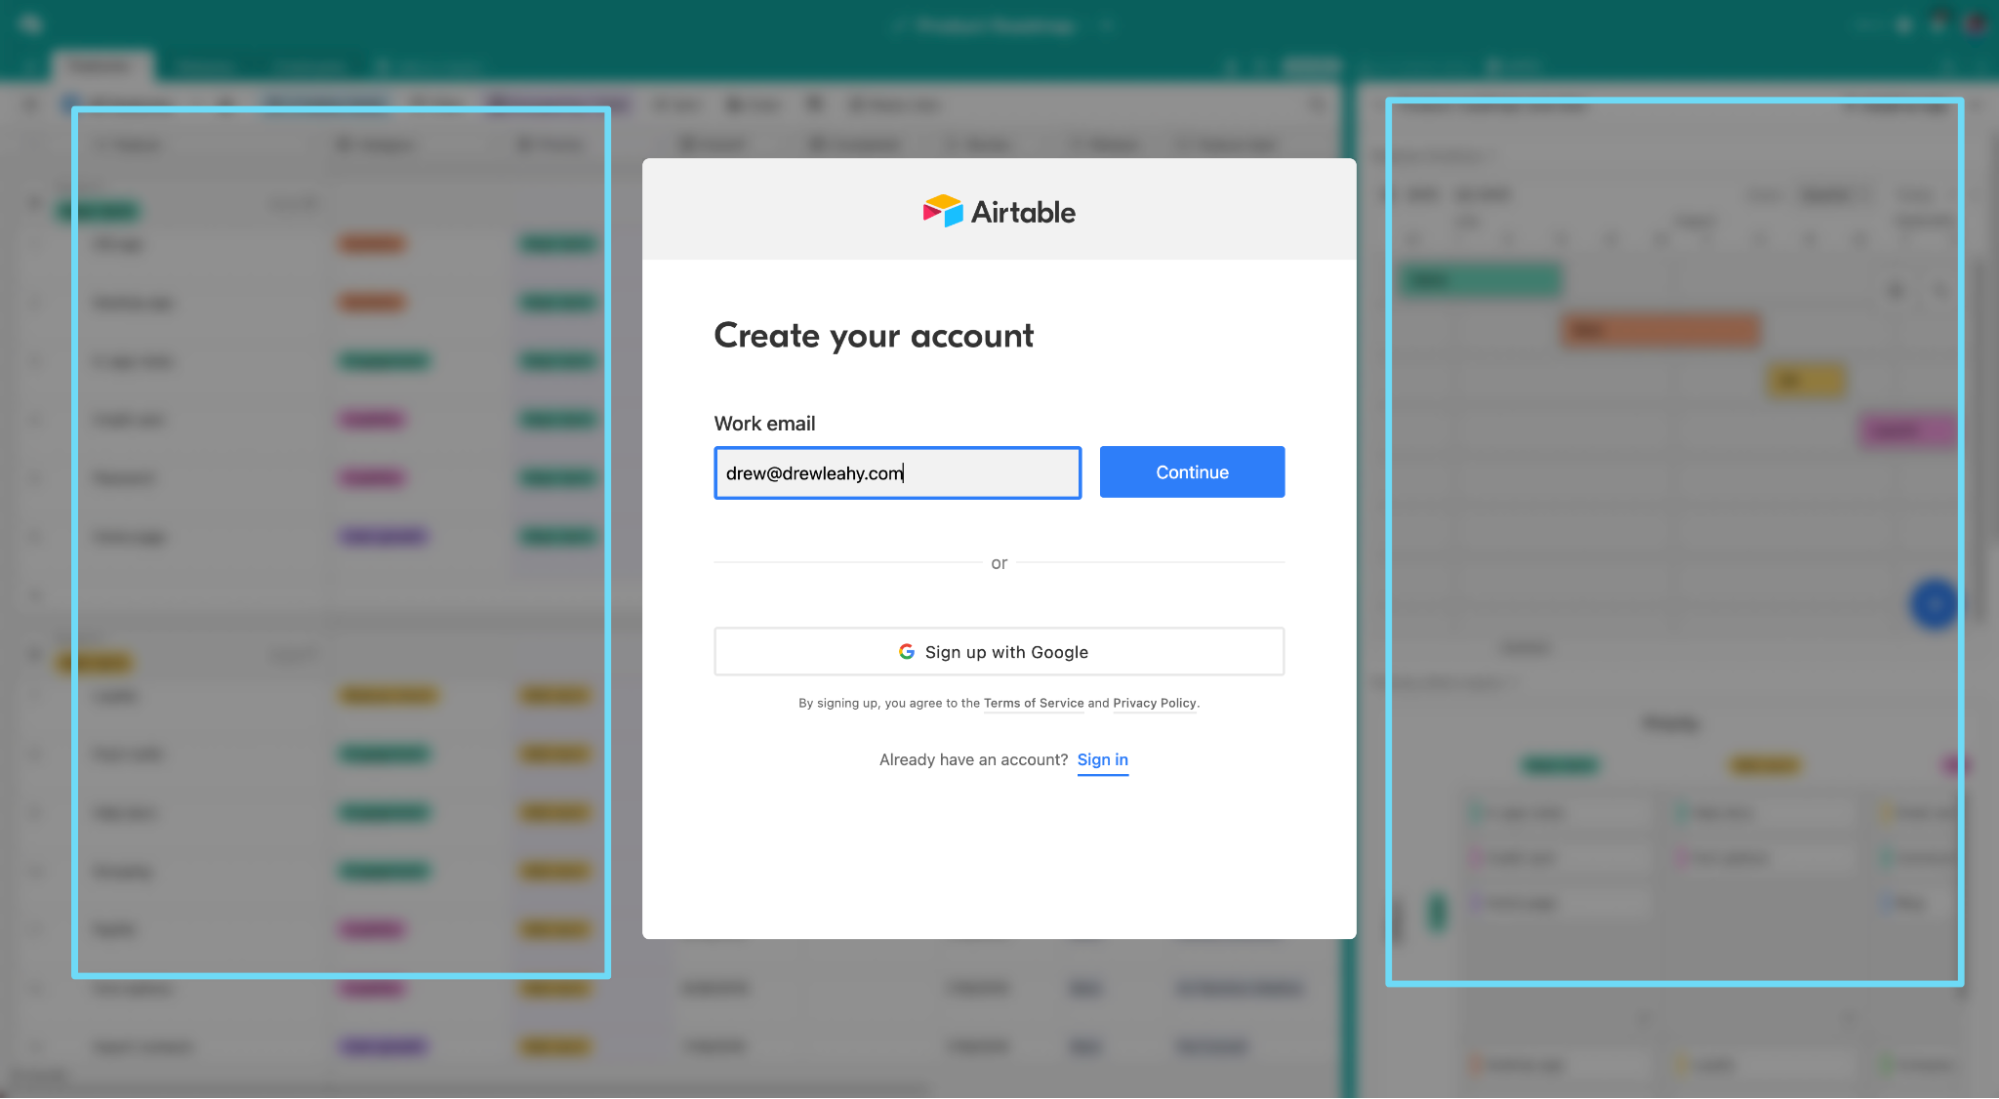 Airtable opt-in form